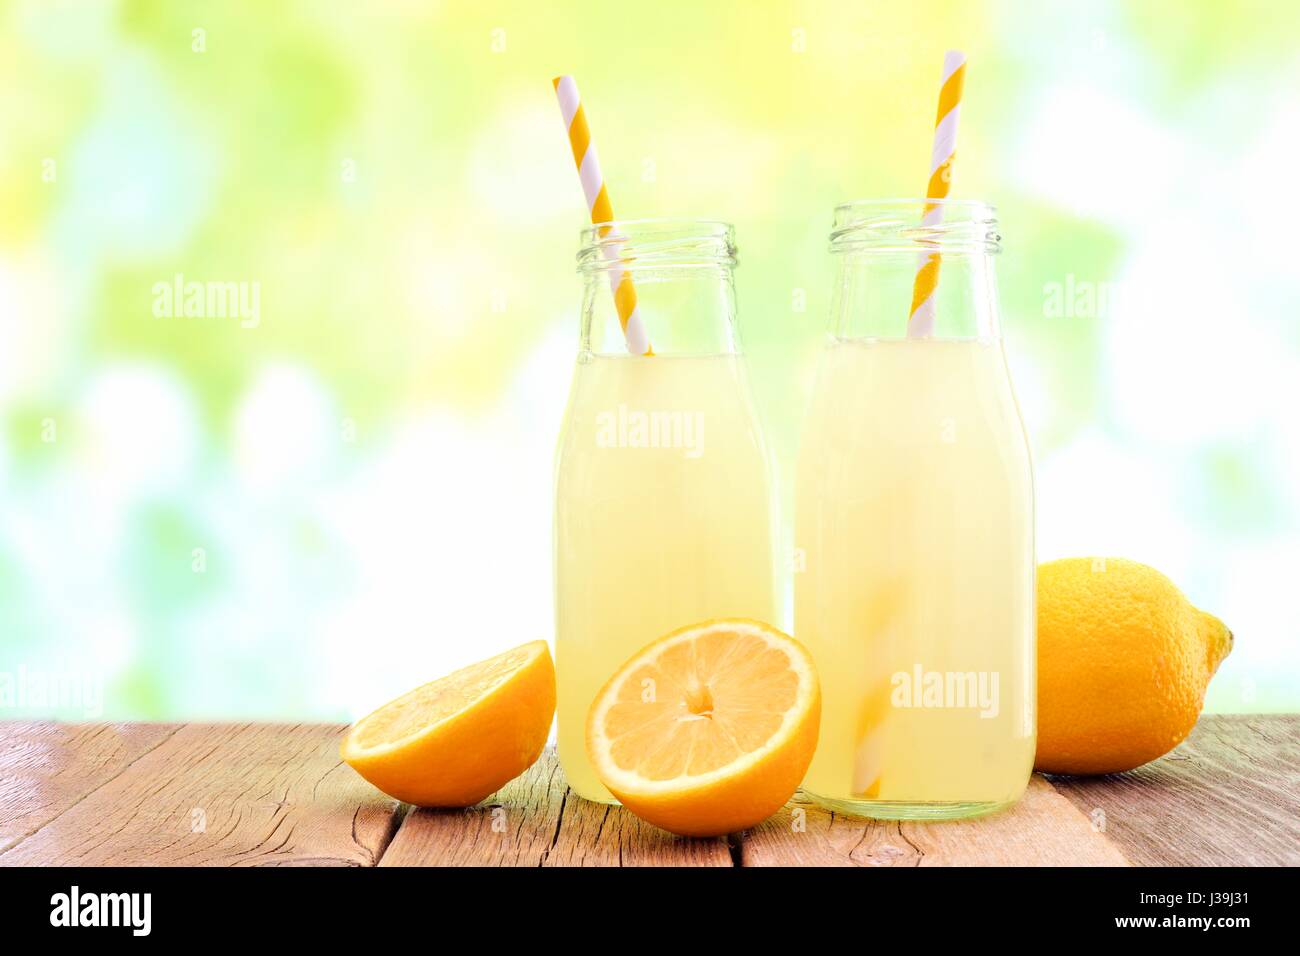 Two bottles of cold lemonade with lemon slices and straws with de-focused outdoor background Stock Photo